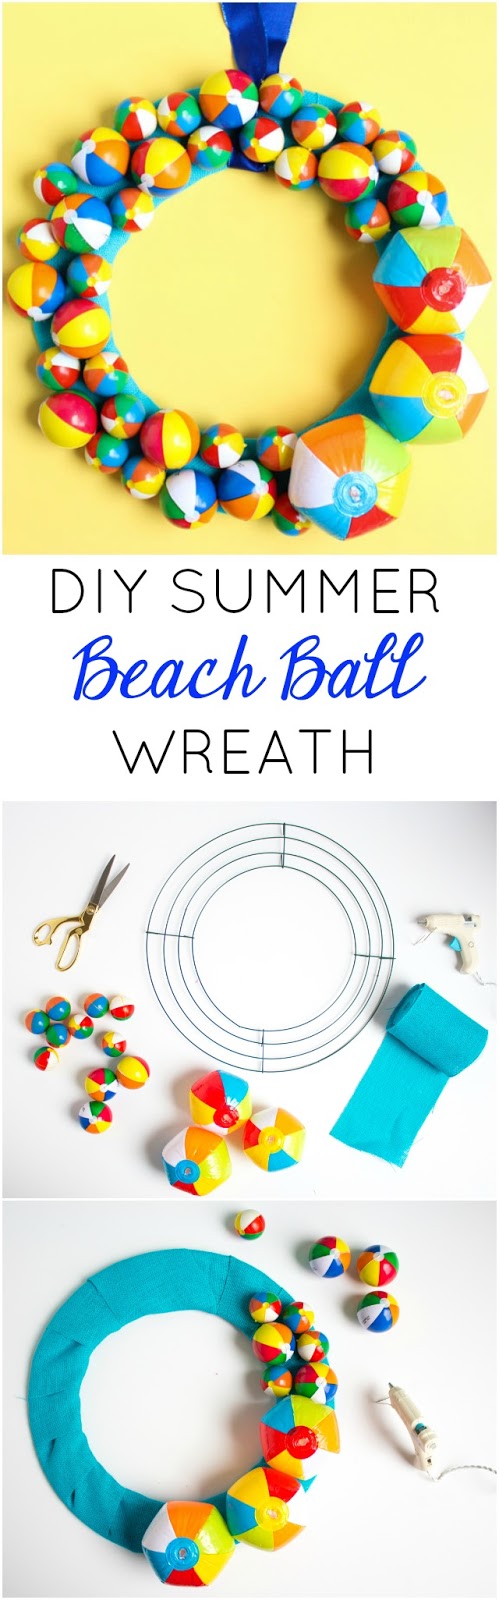 Such a fun summer wreath! Make this with a variety of mini beach balls - perfect pool party decoration too!